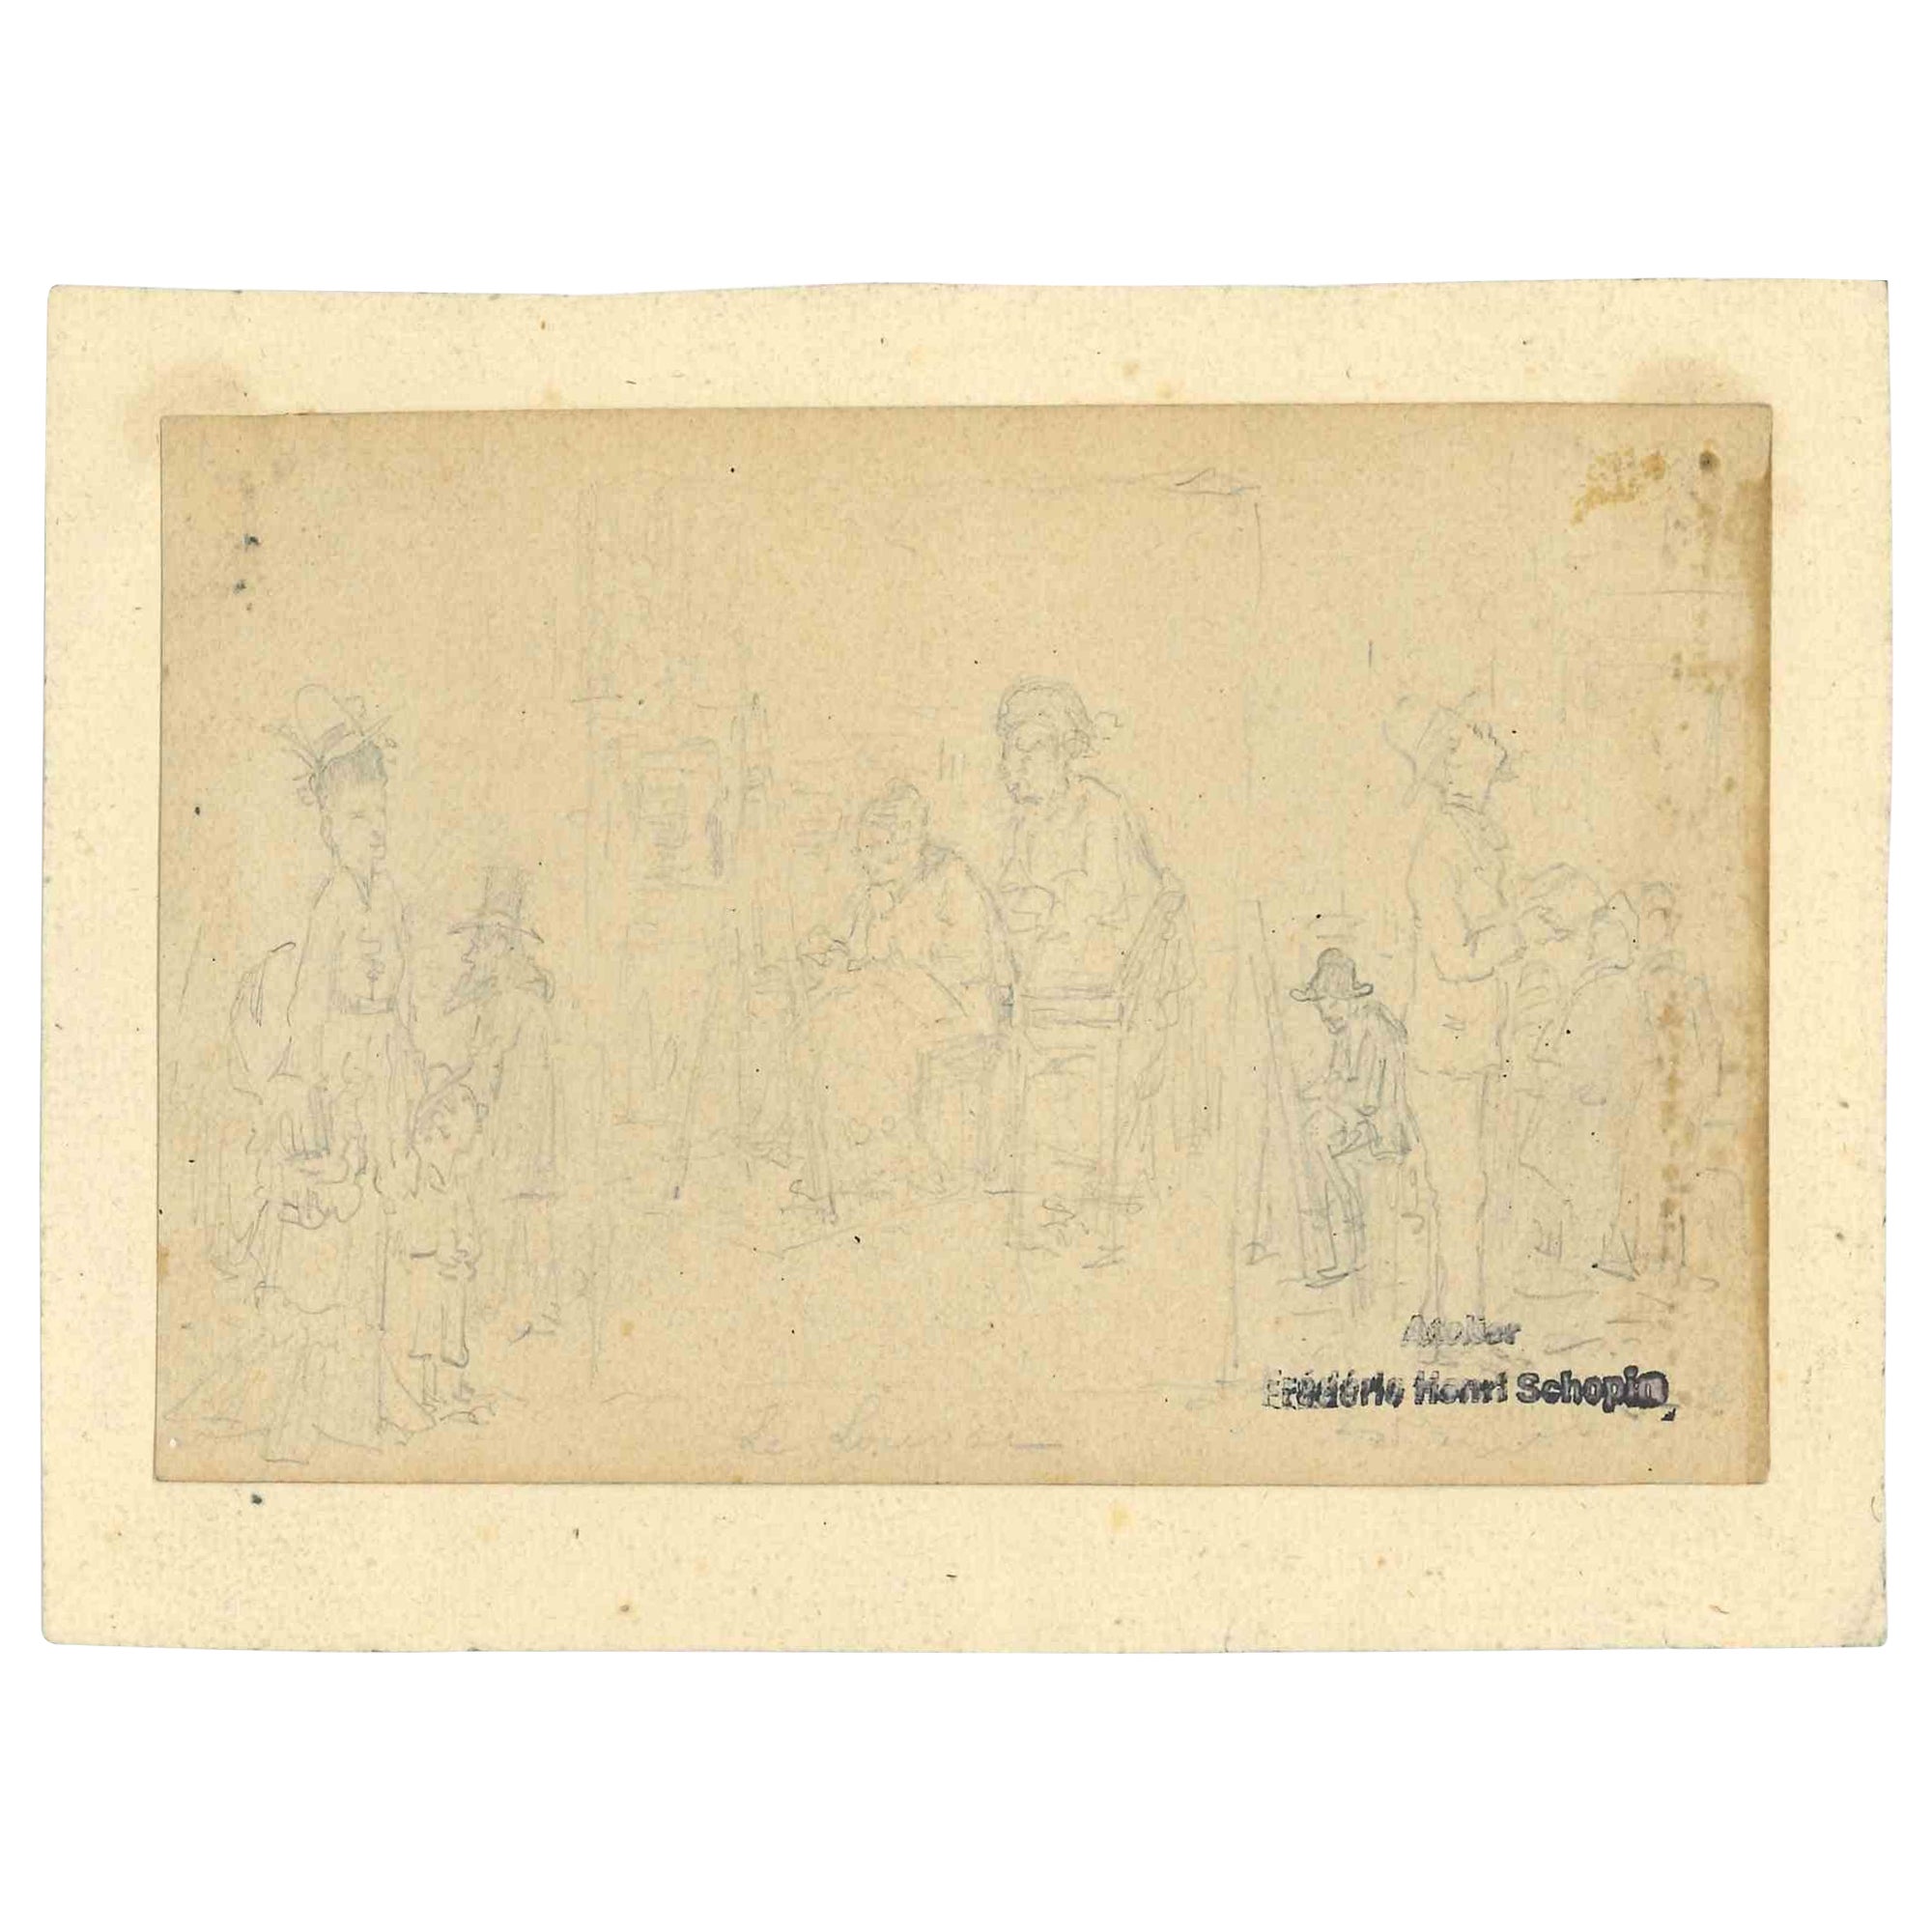 Figures an original drawing in pencil realized by Fredric Henri Schopin(1804-1880) in the 19th Century.

Stamped on the lower right.

Good Conditions.

The artwork is depicted through delicate and fine strokes in a well-balanced composition.